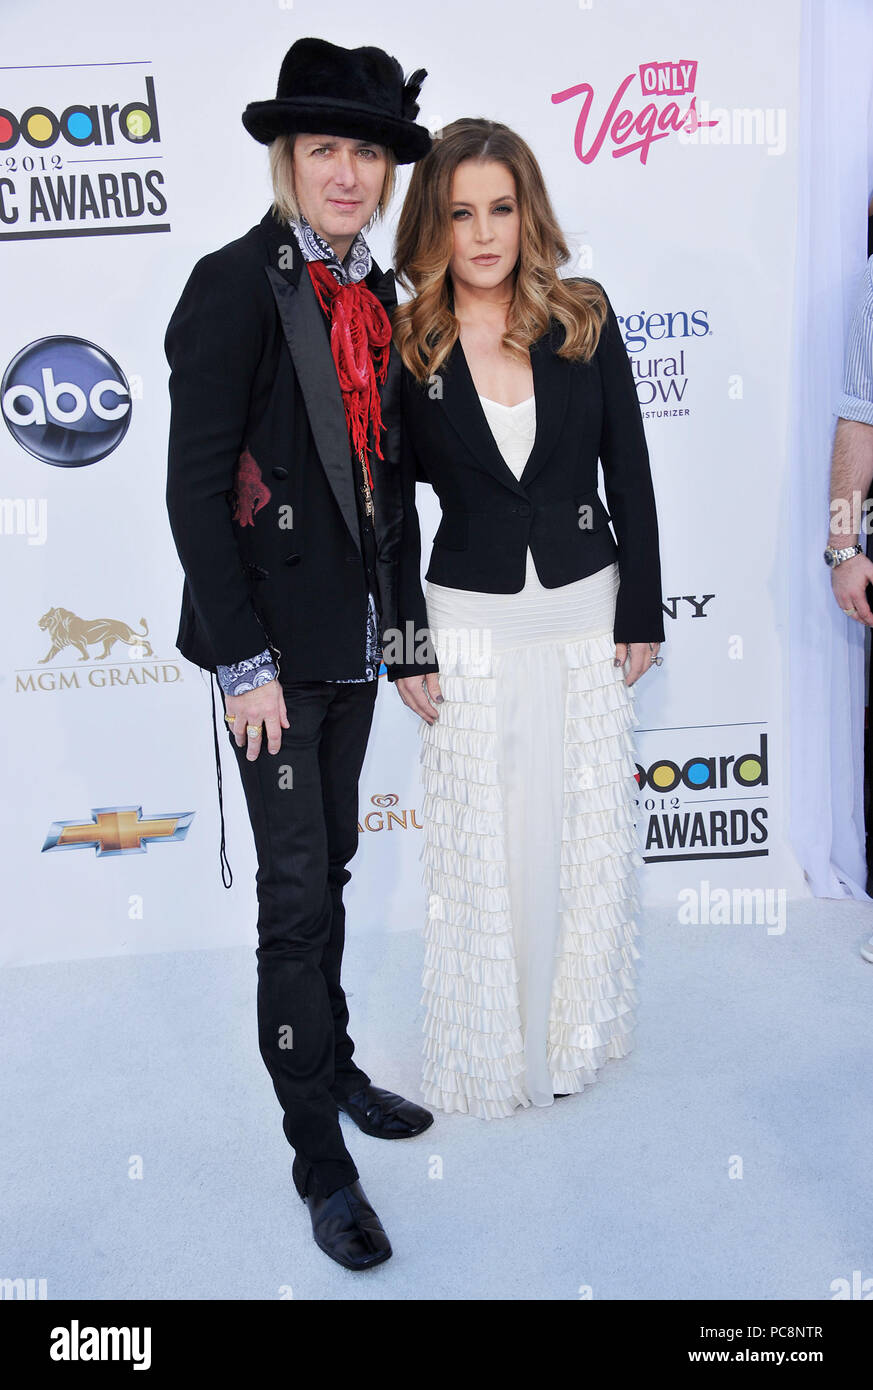 Lisa Marie Pressley, Michael Lockwood  at the 2012 Billboard Music Awards at the MGM Grand Arena In Las Vegas.Lisa Marie Pressley, Michael Lockwood  200 ------------- Red Carpet Event, Vertical, USA, Film Industry, Celebrities,  Photography, Bestof, Arts Culture and Entertainment, Topix Celebrities fashion /  Vertical, Best of, Event in Hollywood Life - California,  Red Carpet and backstage, USA, Film Industry, Celebrities,  movie celebrities, TV celebrities, Music celebrities, Photography, Bestof, Arts Culture and Entertainment,  Topix, vertical,  family from from the year , 2012, inquiry tsu Stock Photo